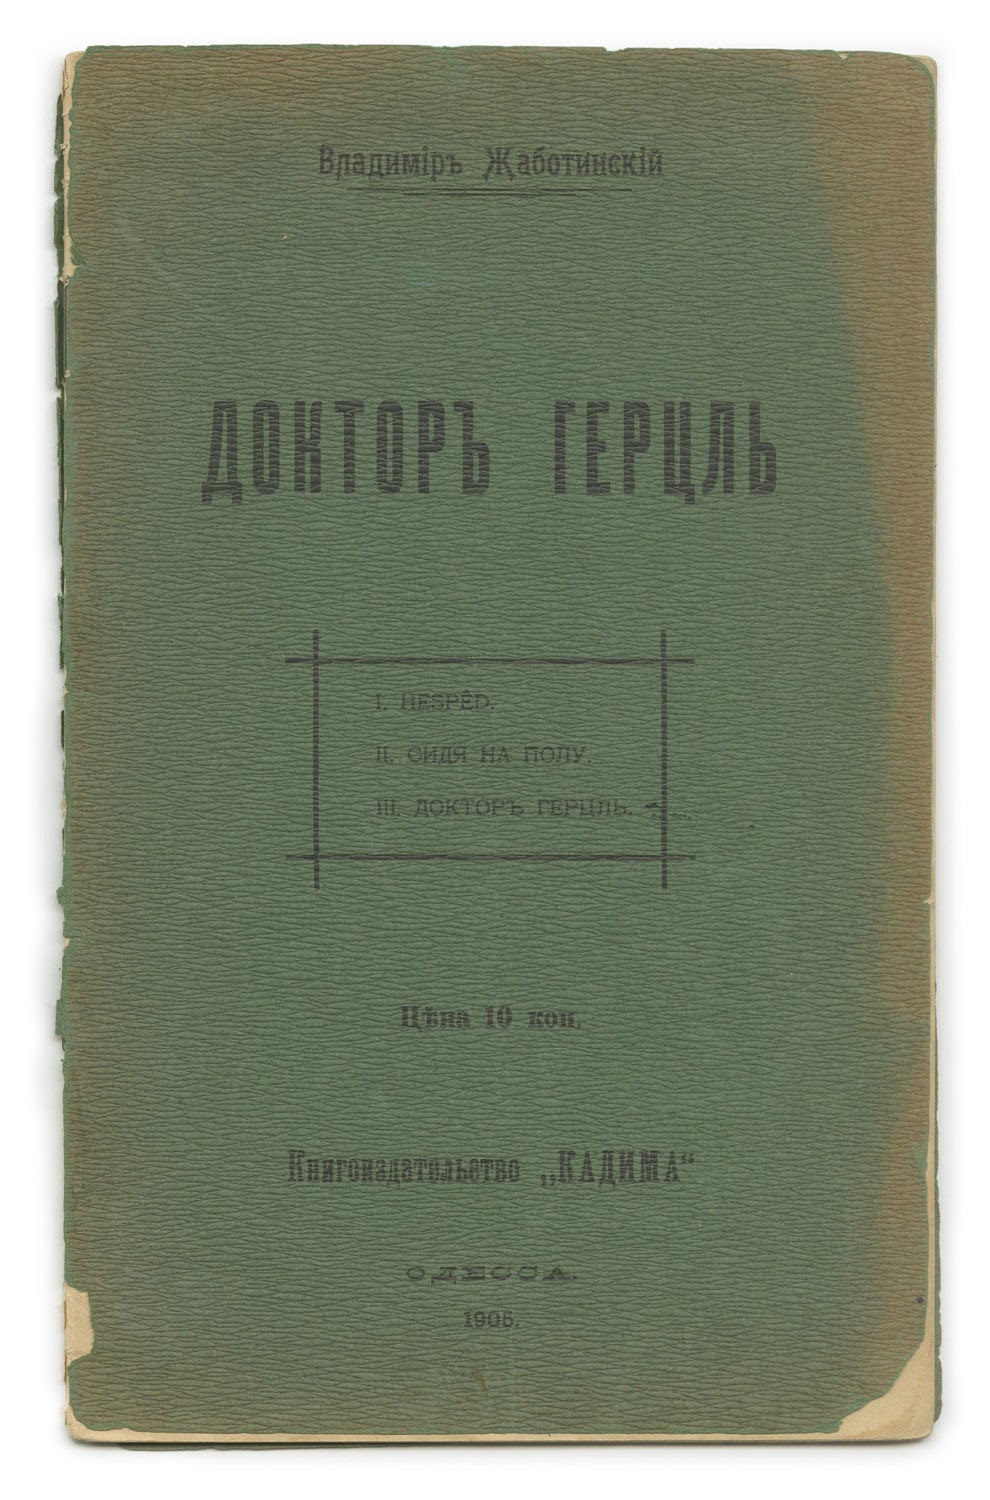 “Doctor Hertzl,” the cover of the booklet containing Jabotinsky’s eulogy